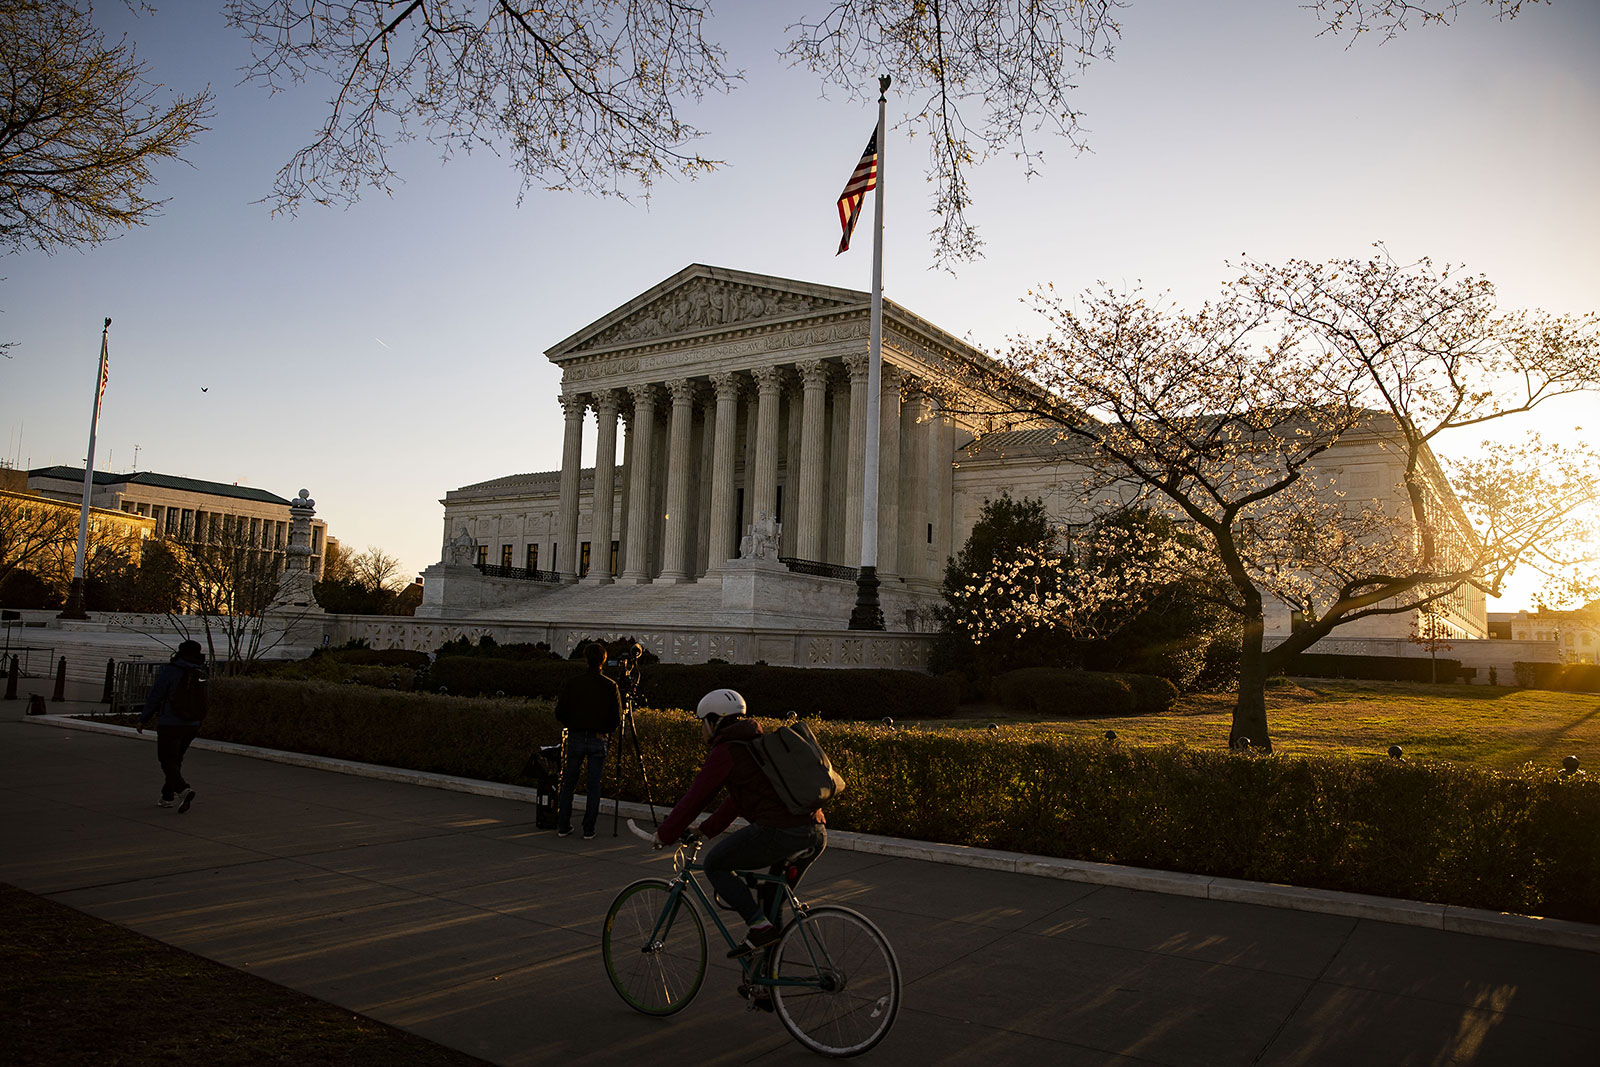 A cyclist rides past the US Supreme Court in Washington, DC, on March 21.